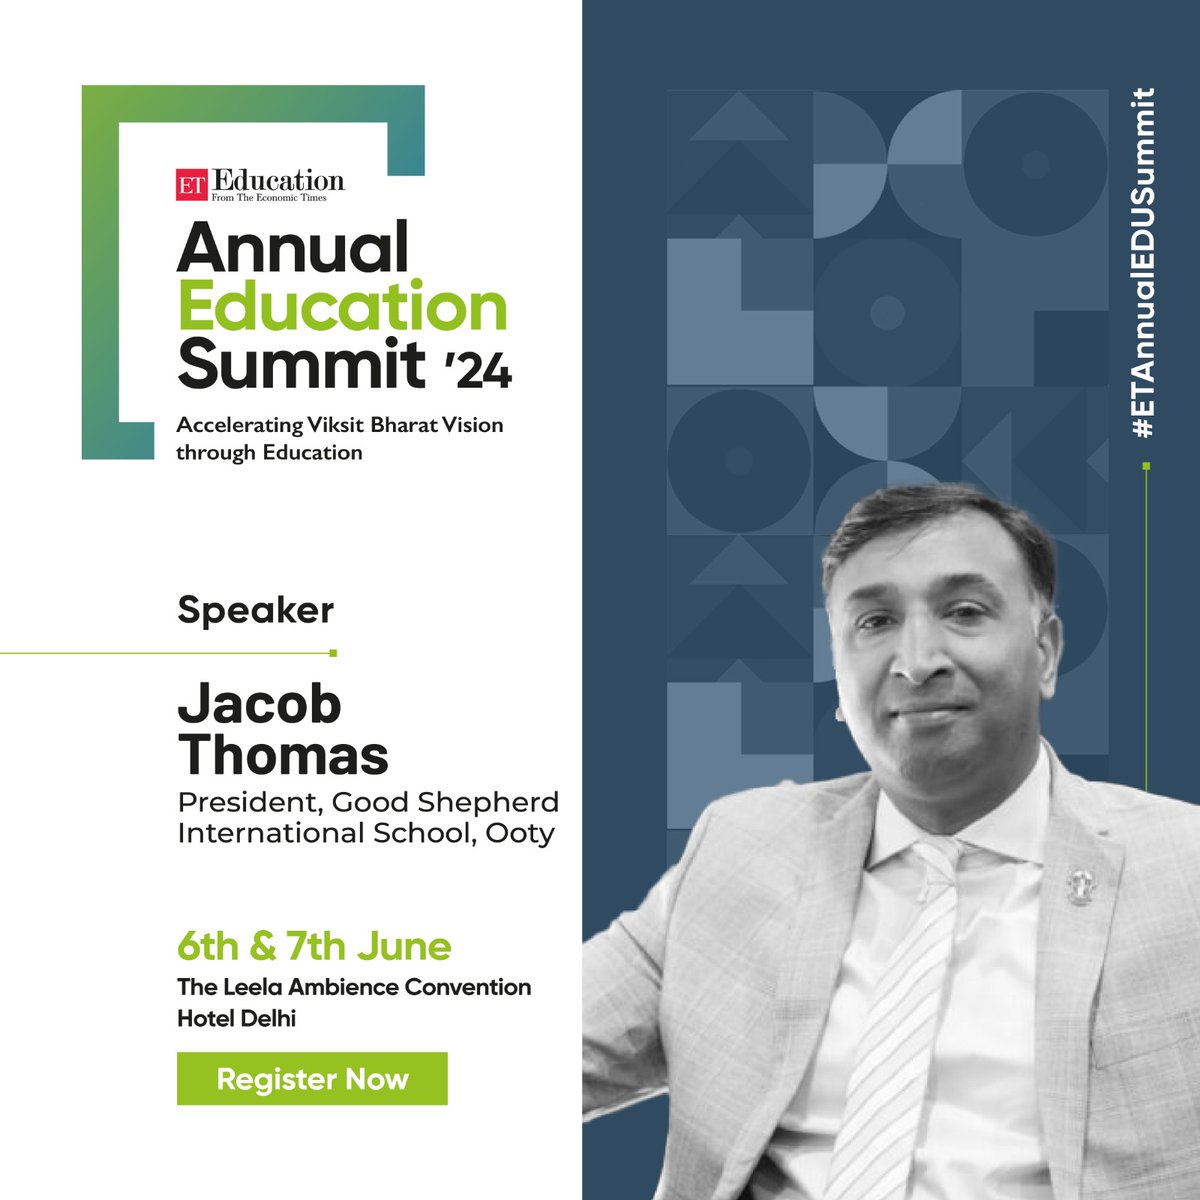 We're excited to welcome our esteemed speaker Jacob Thomas, President, Good Shepherd International School, Ooty at #ETAnnualEDUSummit!

Register Now- bit.ly/3PpTQJ9

#ETEducation #Education #Summit #TechEdu #EdTech #TechInEducation #School #STEMEducation #DigitalLearning